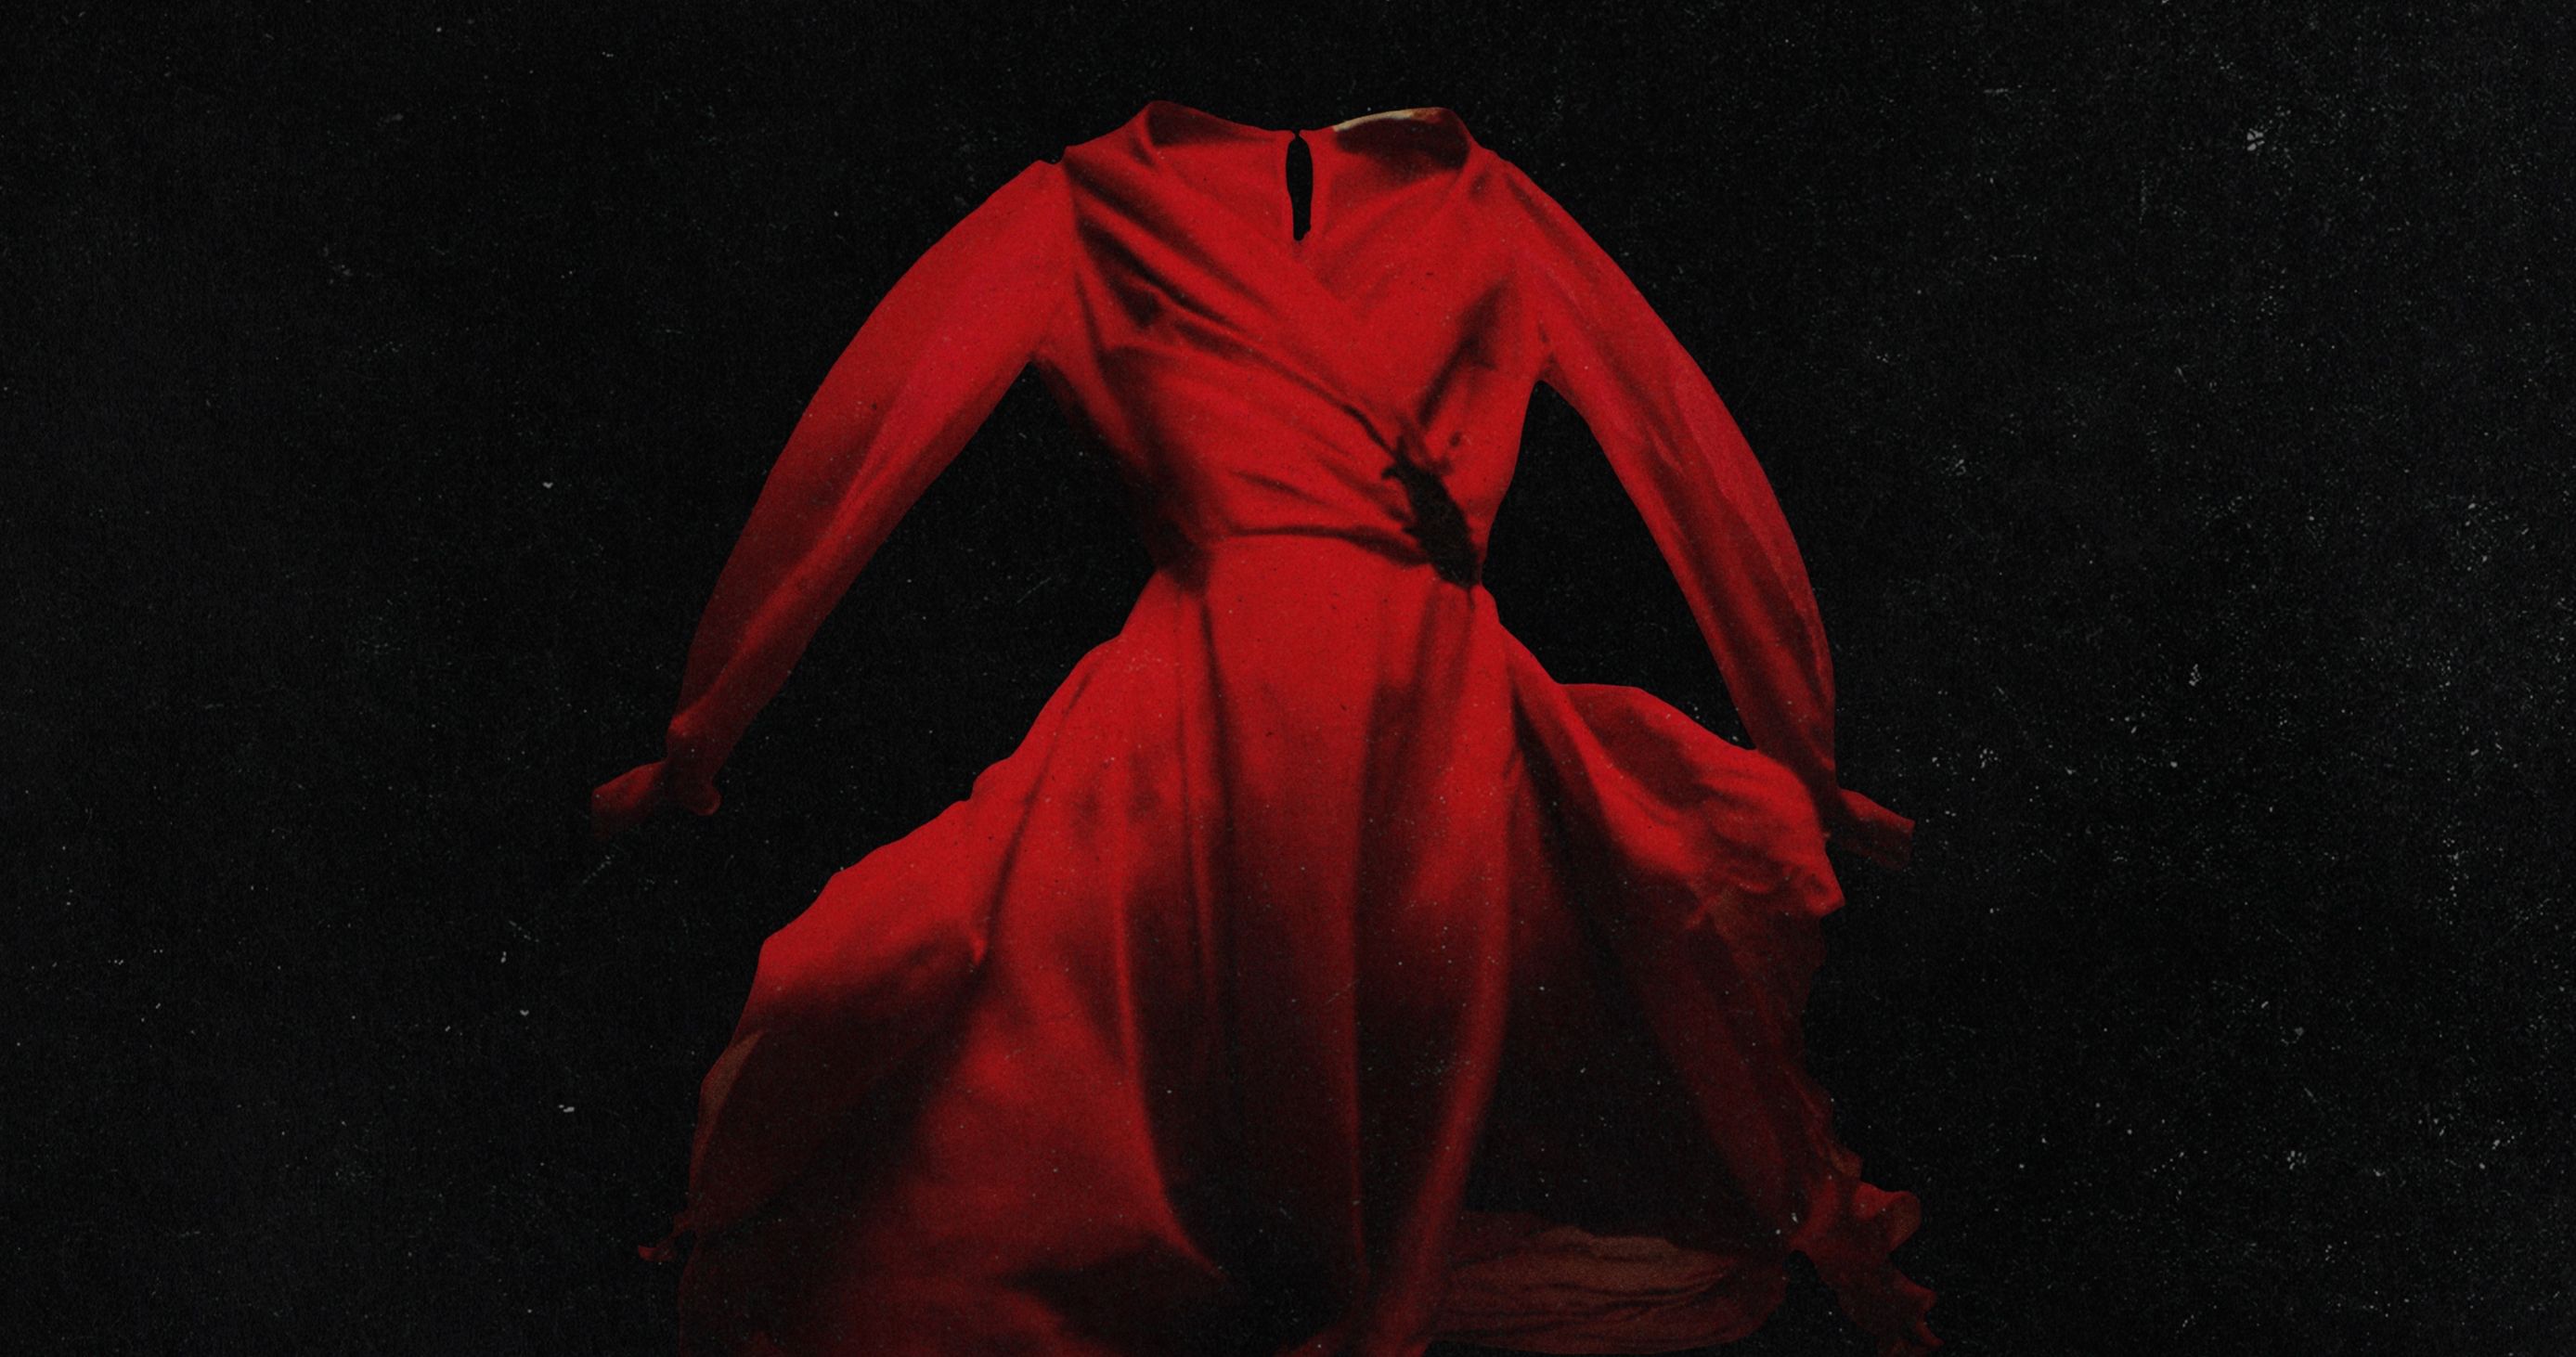 In Fabric Trailer Unleashes a Killer Dress